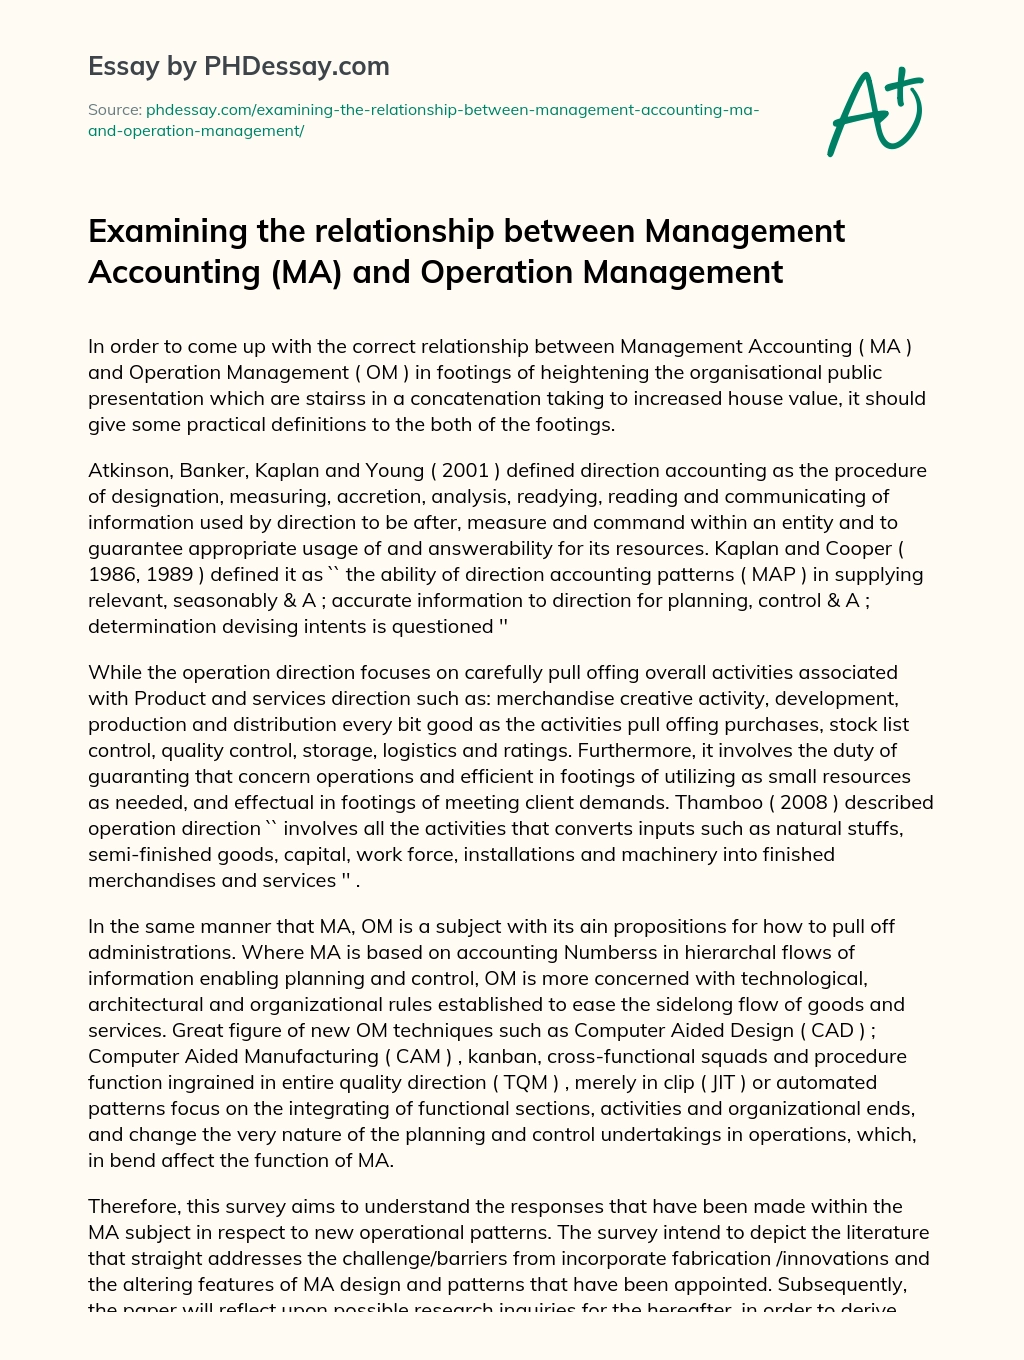 Understanding the Relationship between Management Accounting and Operation Management for Organizational Performance Enhancement essay